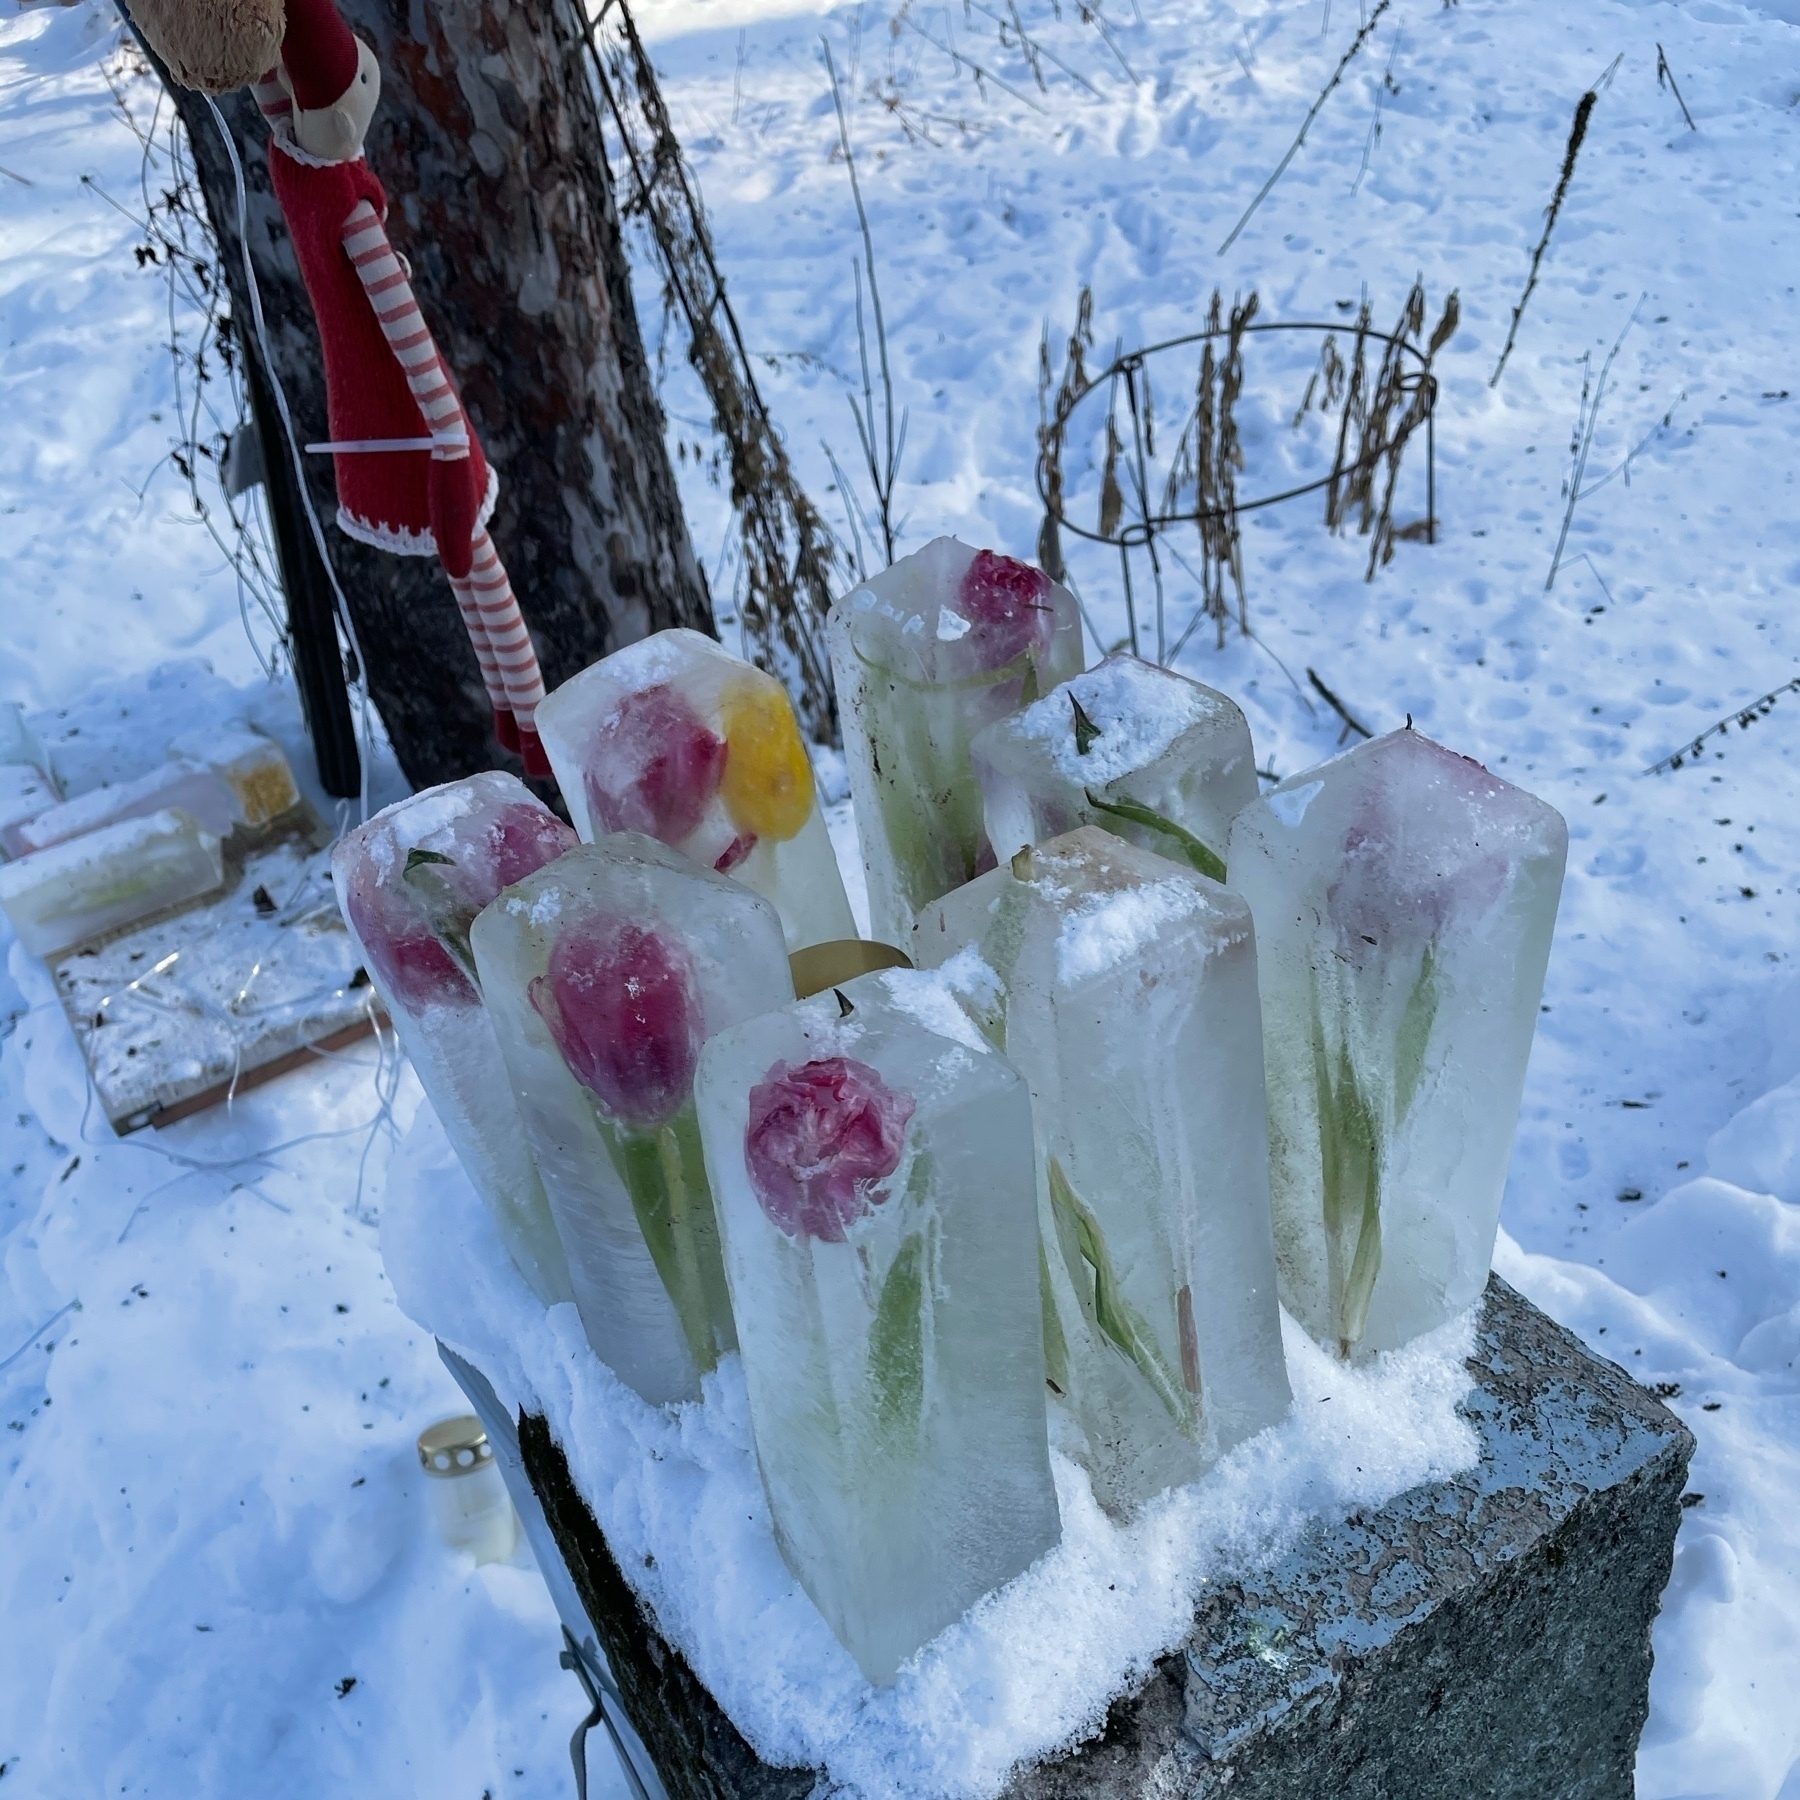 ice blocks that have frozen tulips inside them